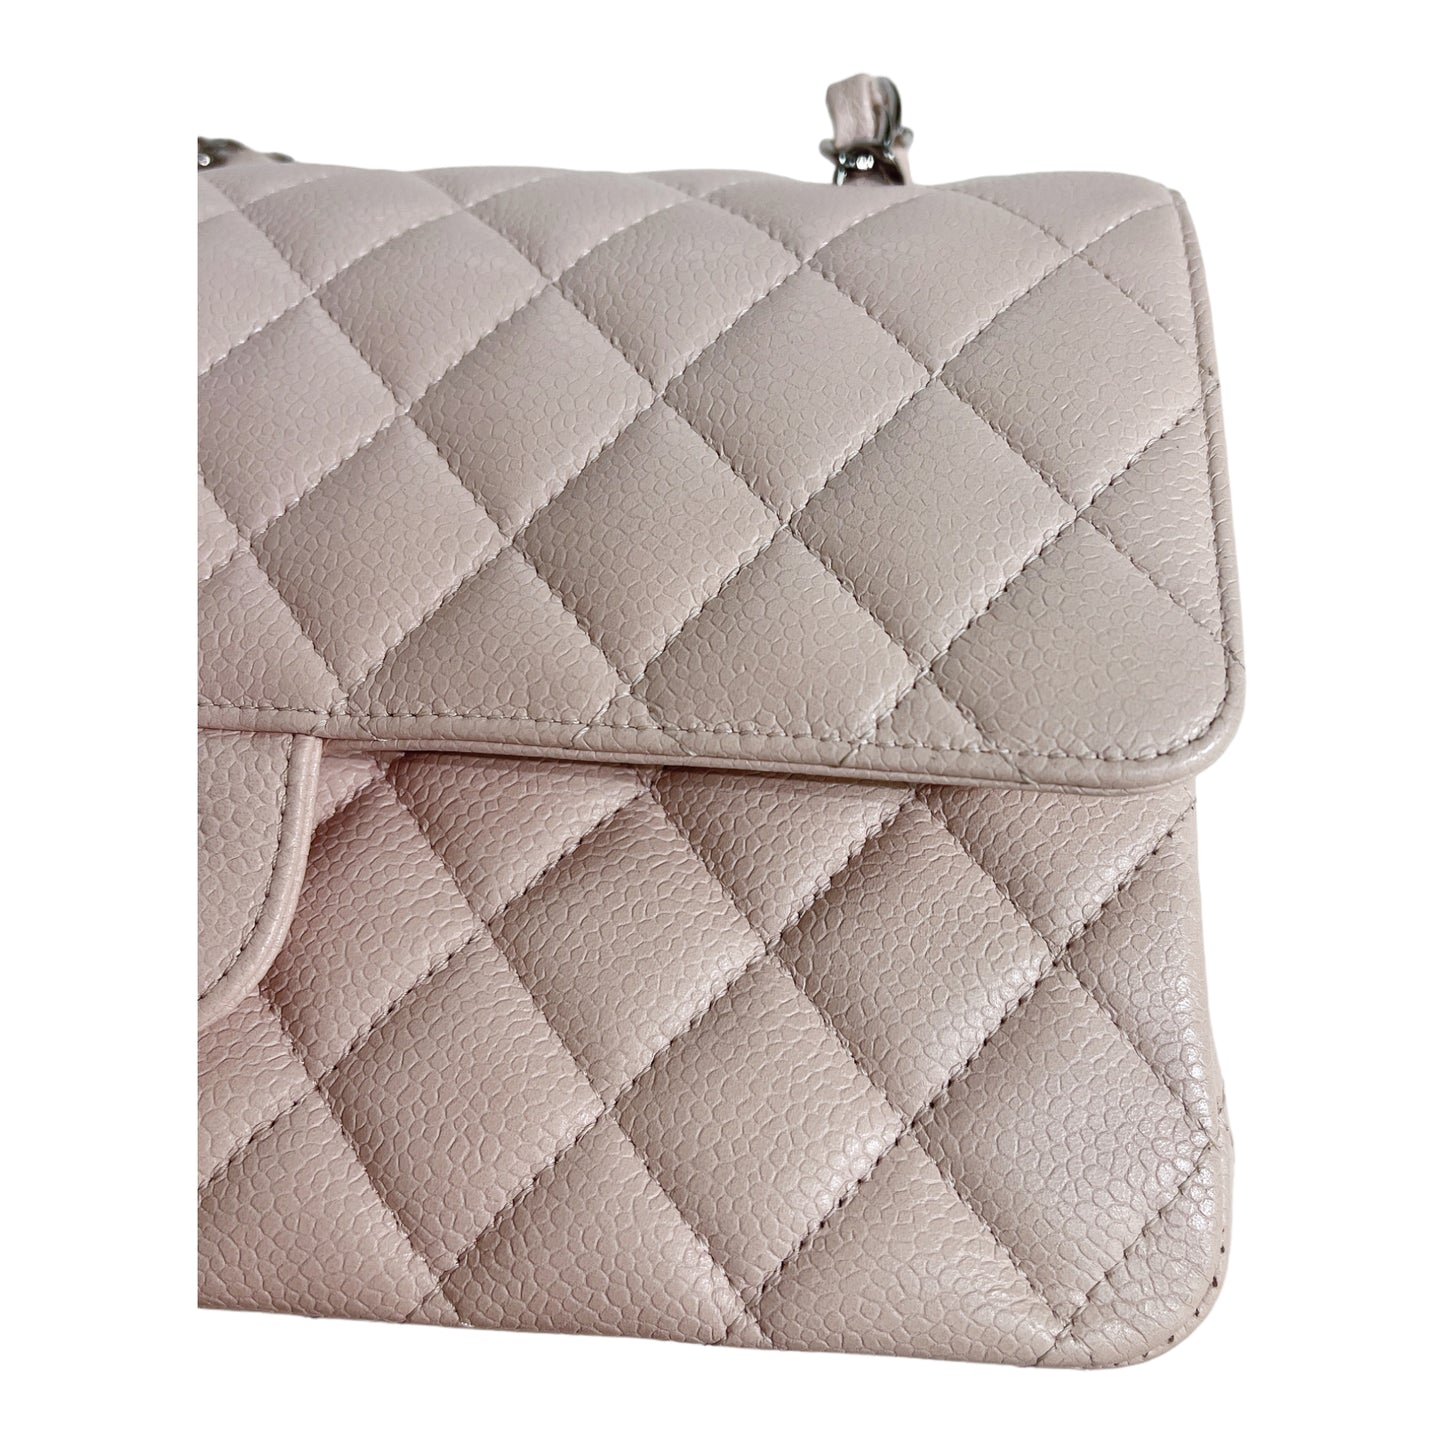 CHANEL DOUBLE FLAP BAG (1893xxxx) JUMBO LIGHT PINK CAVIAR LEATHER SILVER  HARDWARE, WITH DUST COVER, NO CARD